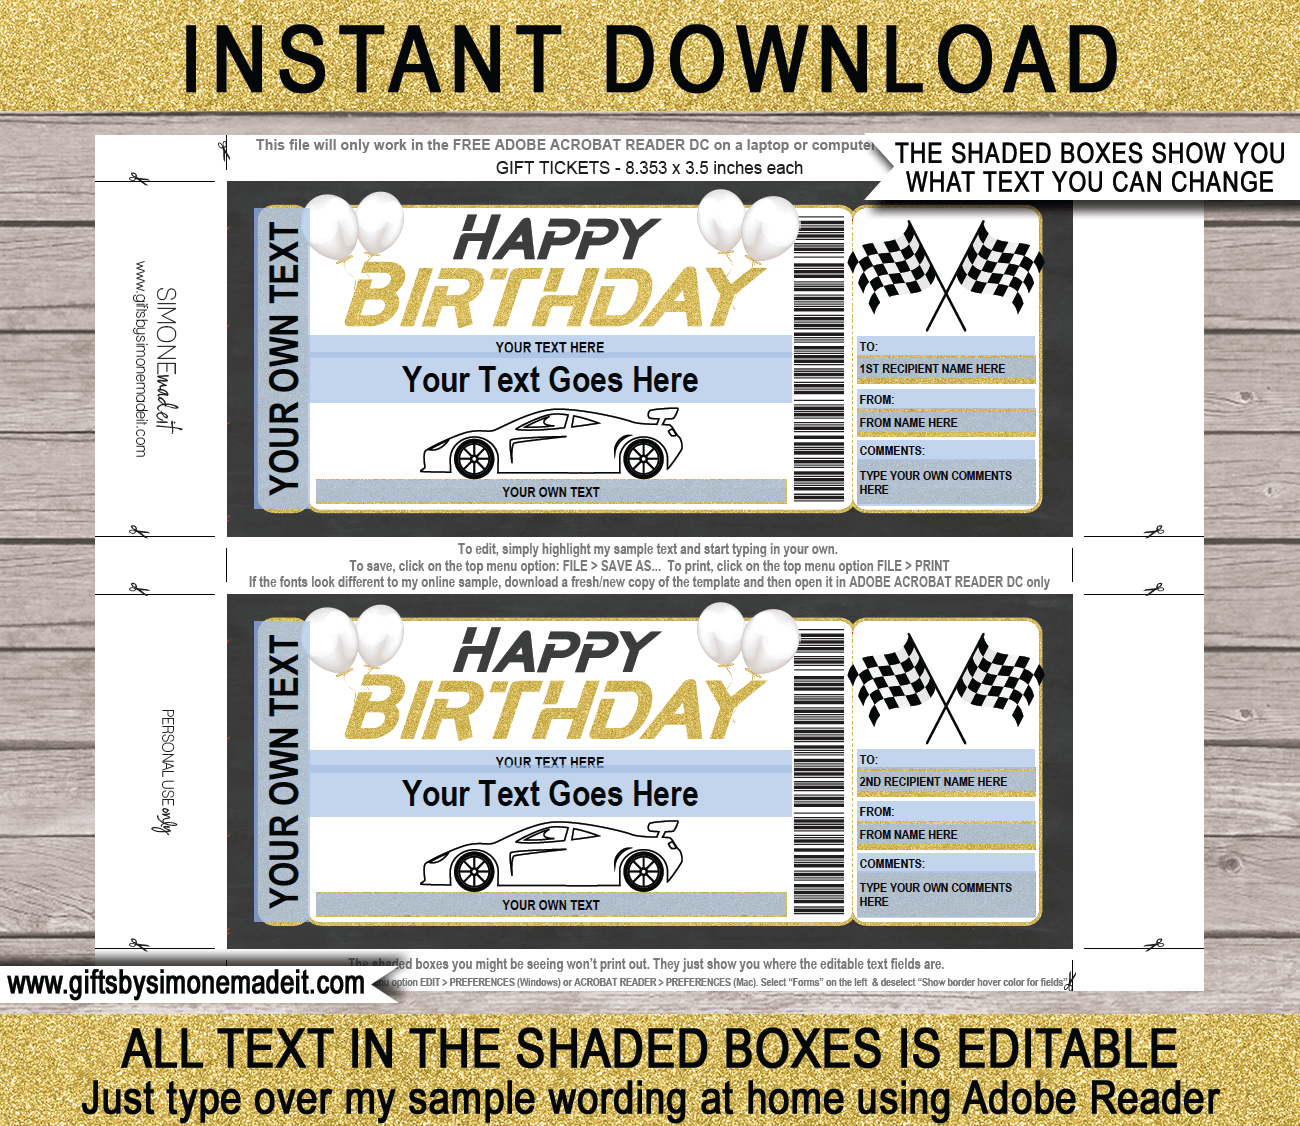 https://www.giftsbysimonemadeit.com/wp-content/uploads/2021/06/Birthday-NASCAR-Ticket-Template-editable-text.png